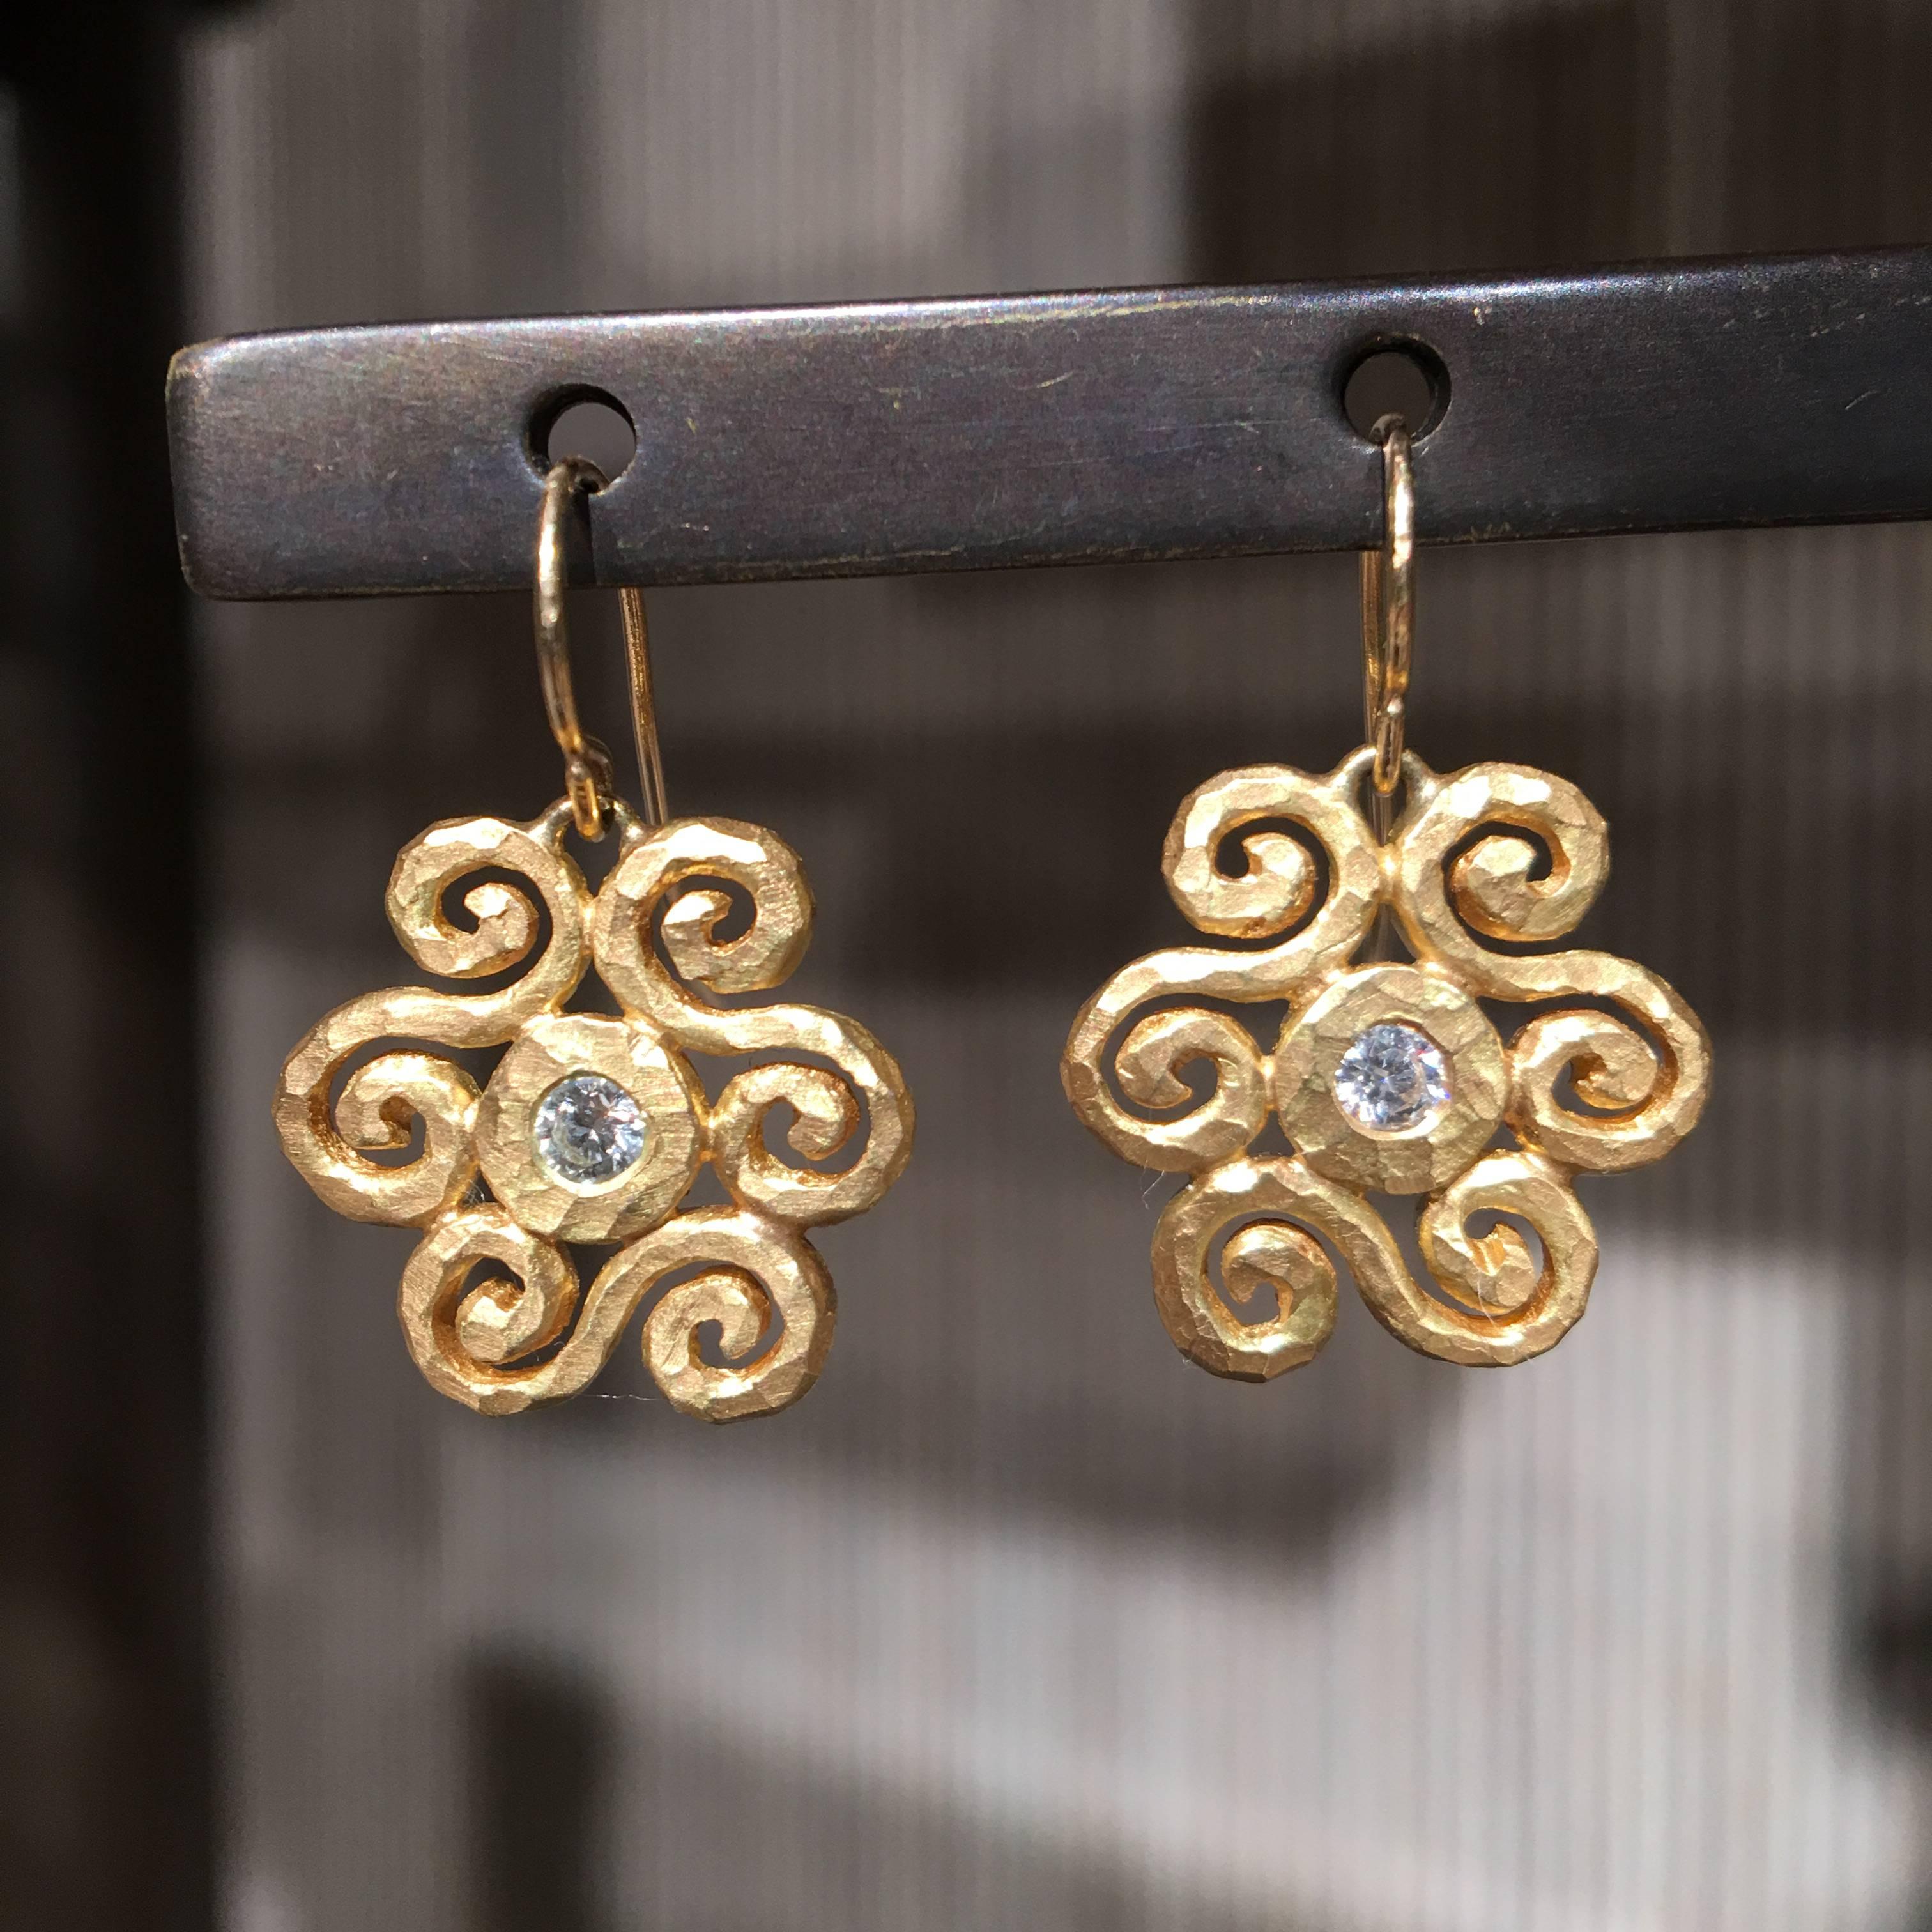 Scroll Crush Earrings handcrafted by jewelry artist Pamela Froman in hand-hammered and matte-finished 18k yellow gold featuring two round brilliant-cut white diamonds totaling 0.16 carats. 